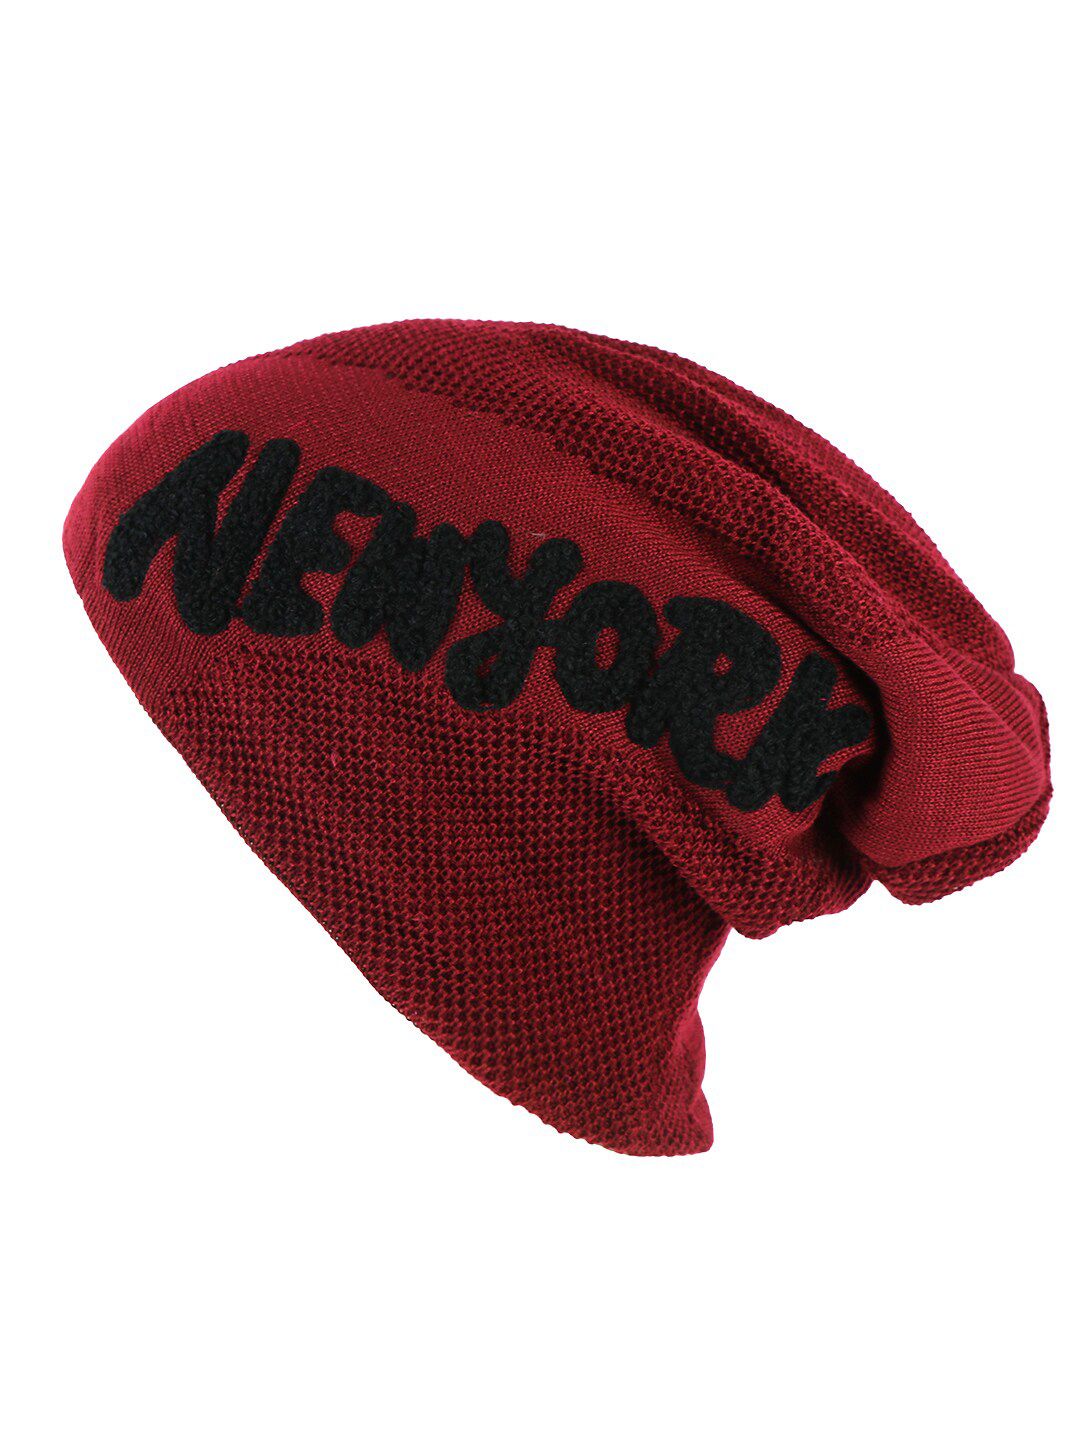 iSWEVEN Unisex Red & Black Beanie Price in India